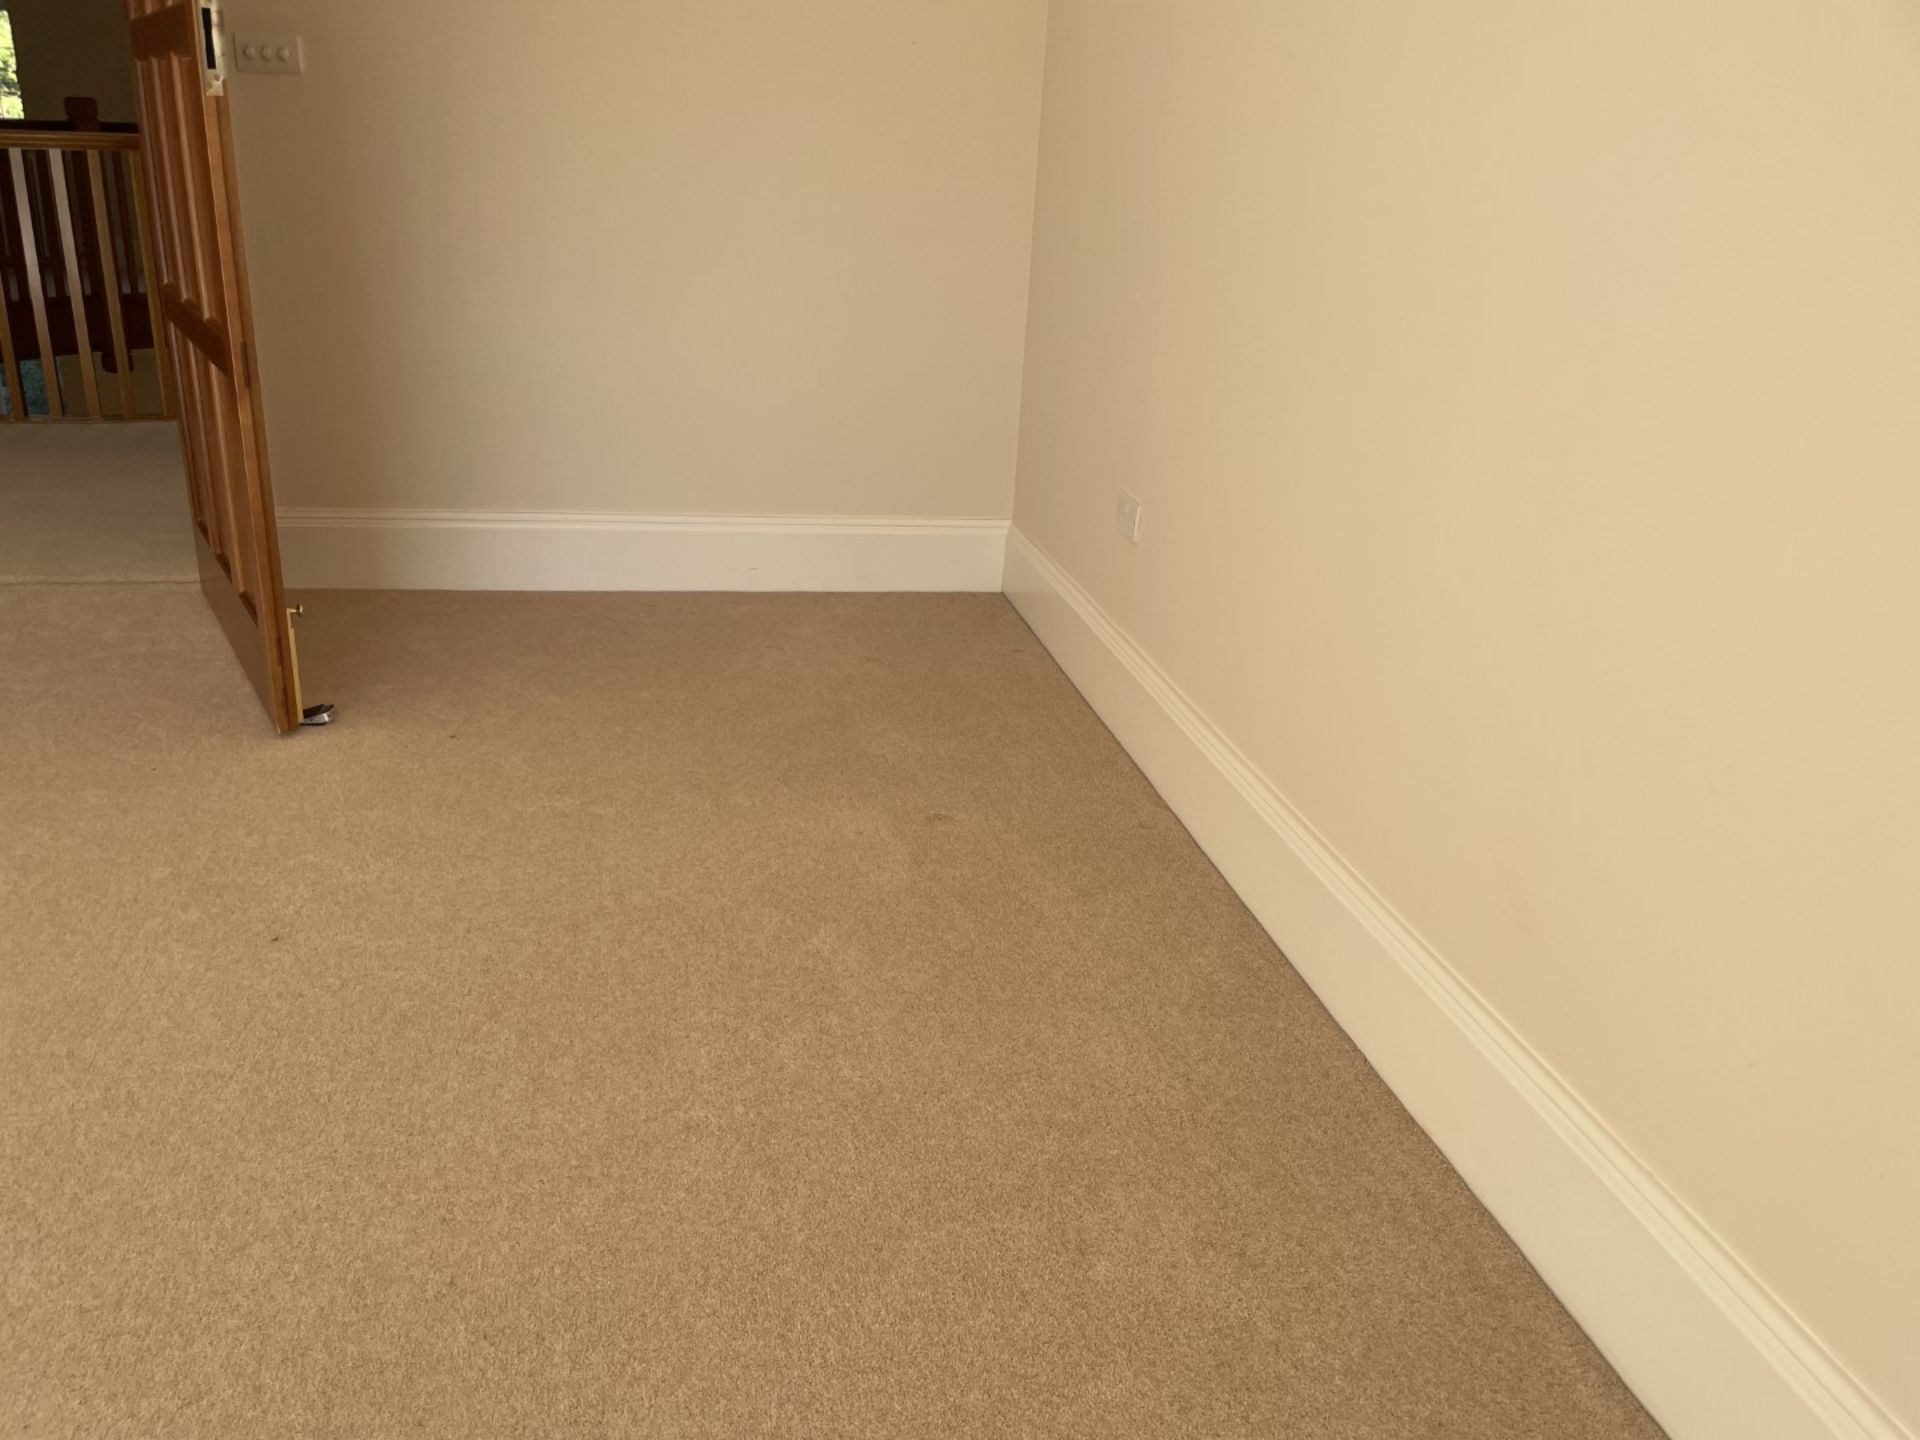 1 x Approximately 22-Metres of Painted Timber Wooden Skirting Boards, In White - Ref: PAN224 - CL896 - Image 4 of 10